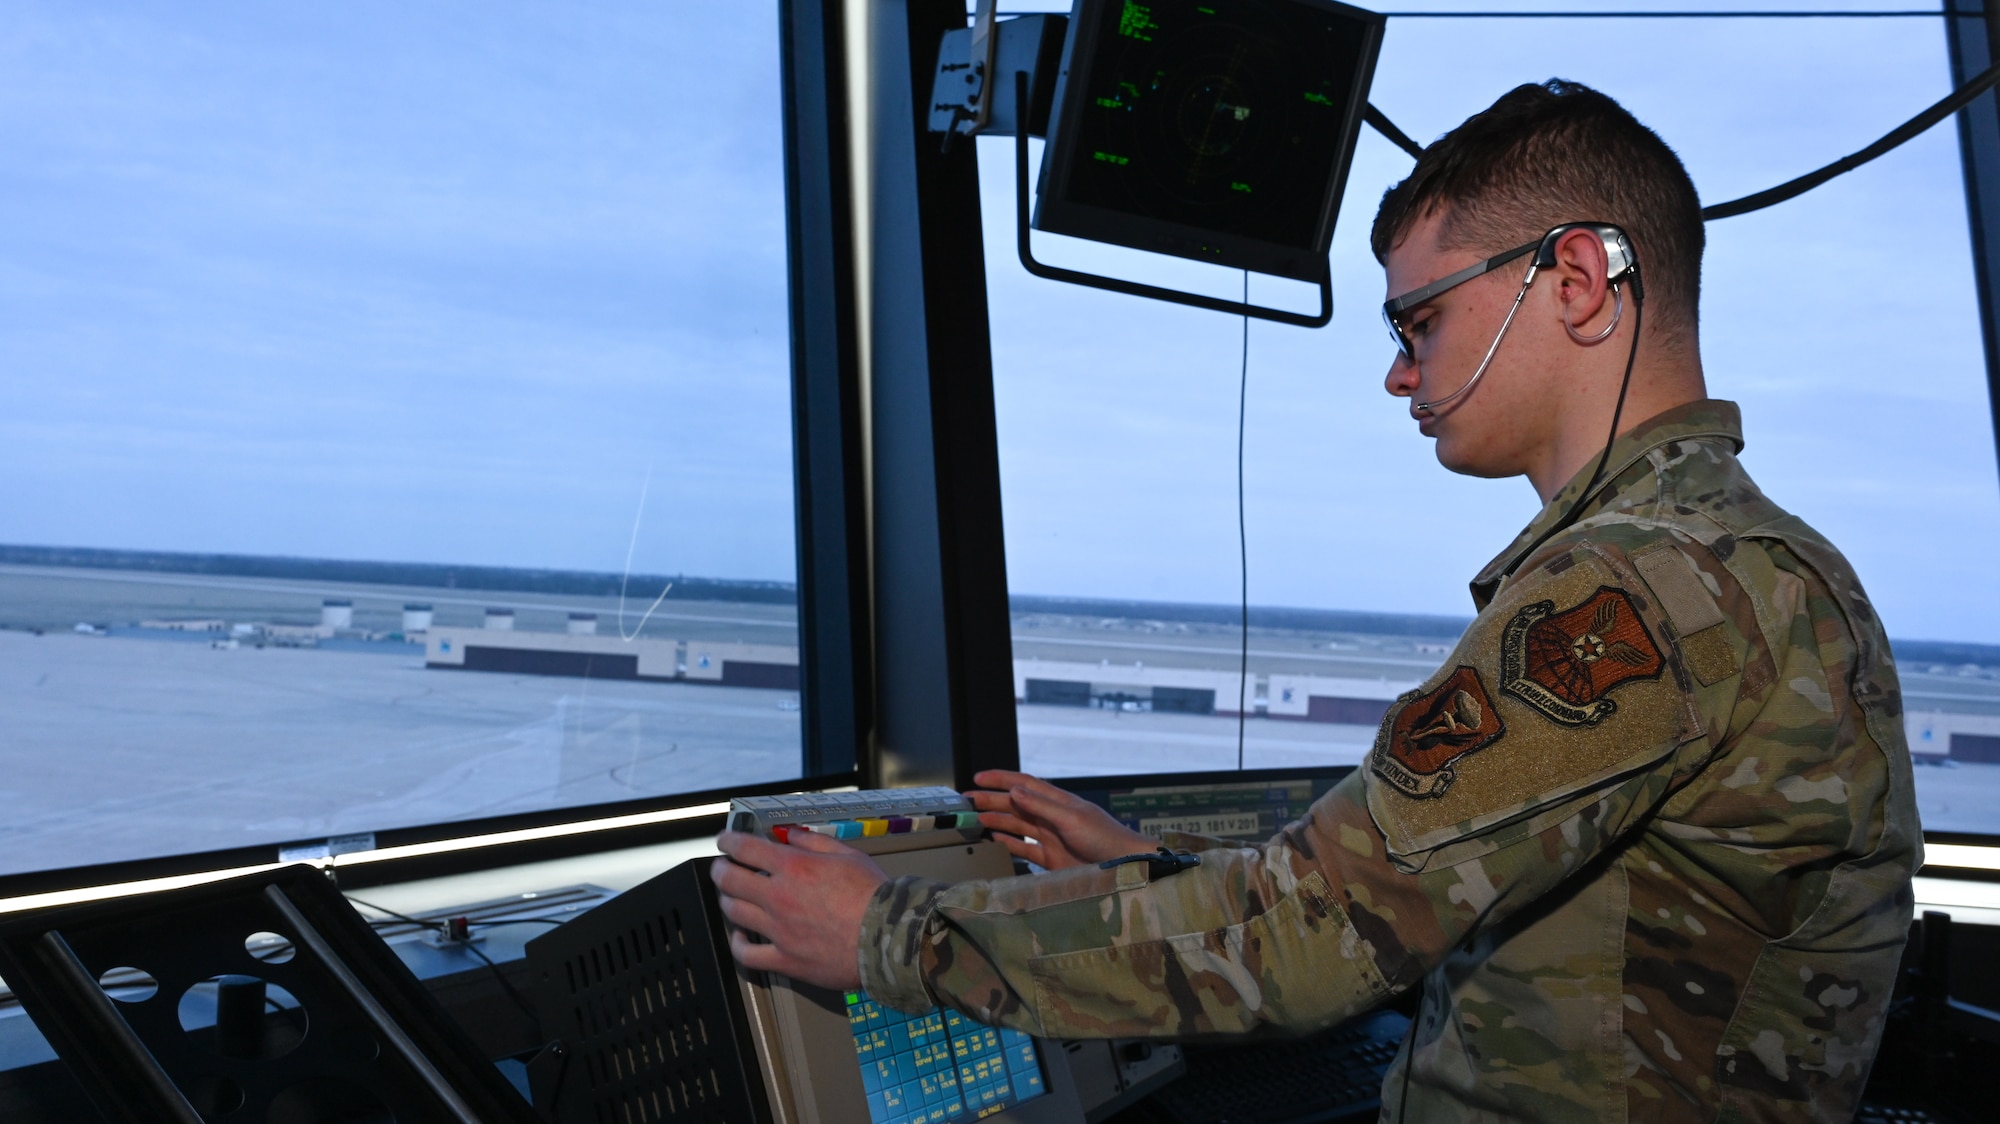 U.S. Air Force Airman 1st Class Dylan Collins, 509th Operations Support Squadron Air Traffic Control apprentice, tracks aircraft activity at Whiteman Air Force Base, Mo., March 15, 2023. Air traffic controllers safely separate aircraft, sequence aircraft and issue safety alerts. (U.S. Air Force photo by Airman 1st Class Hailey Farrell)